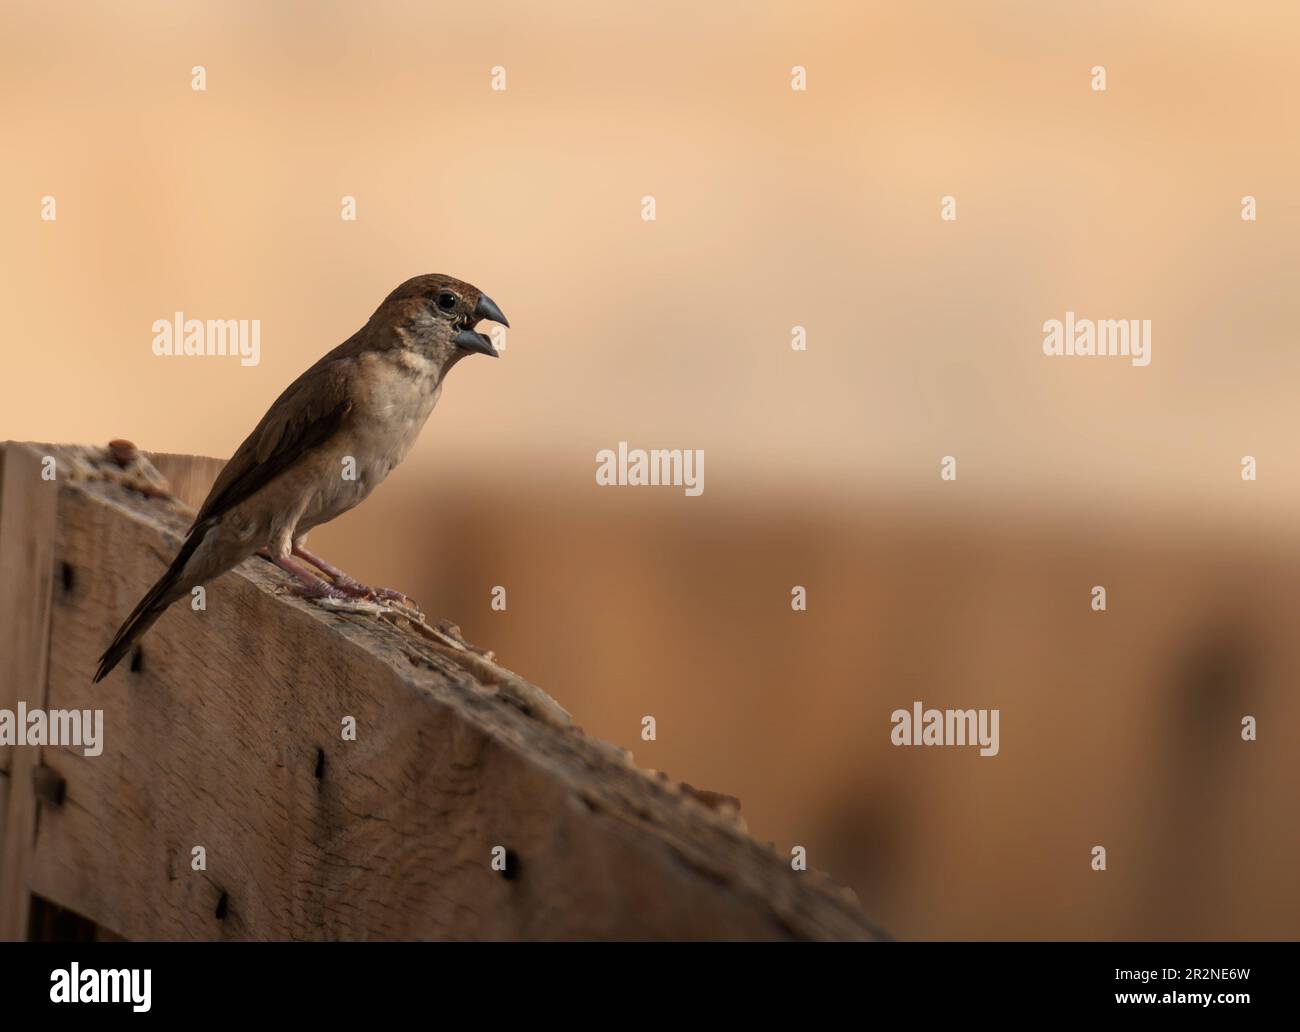 Sparrow sitting on a wooden fence with a blurred background. Stock Photo